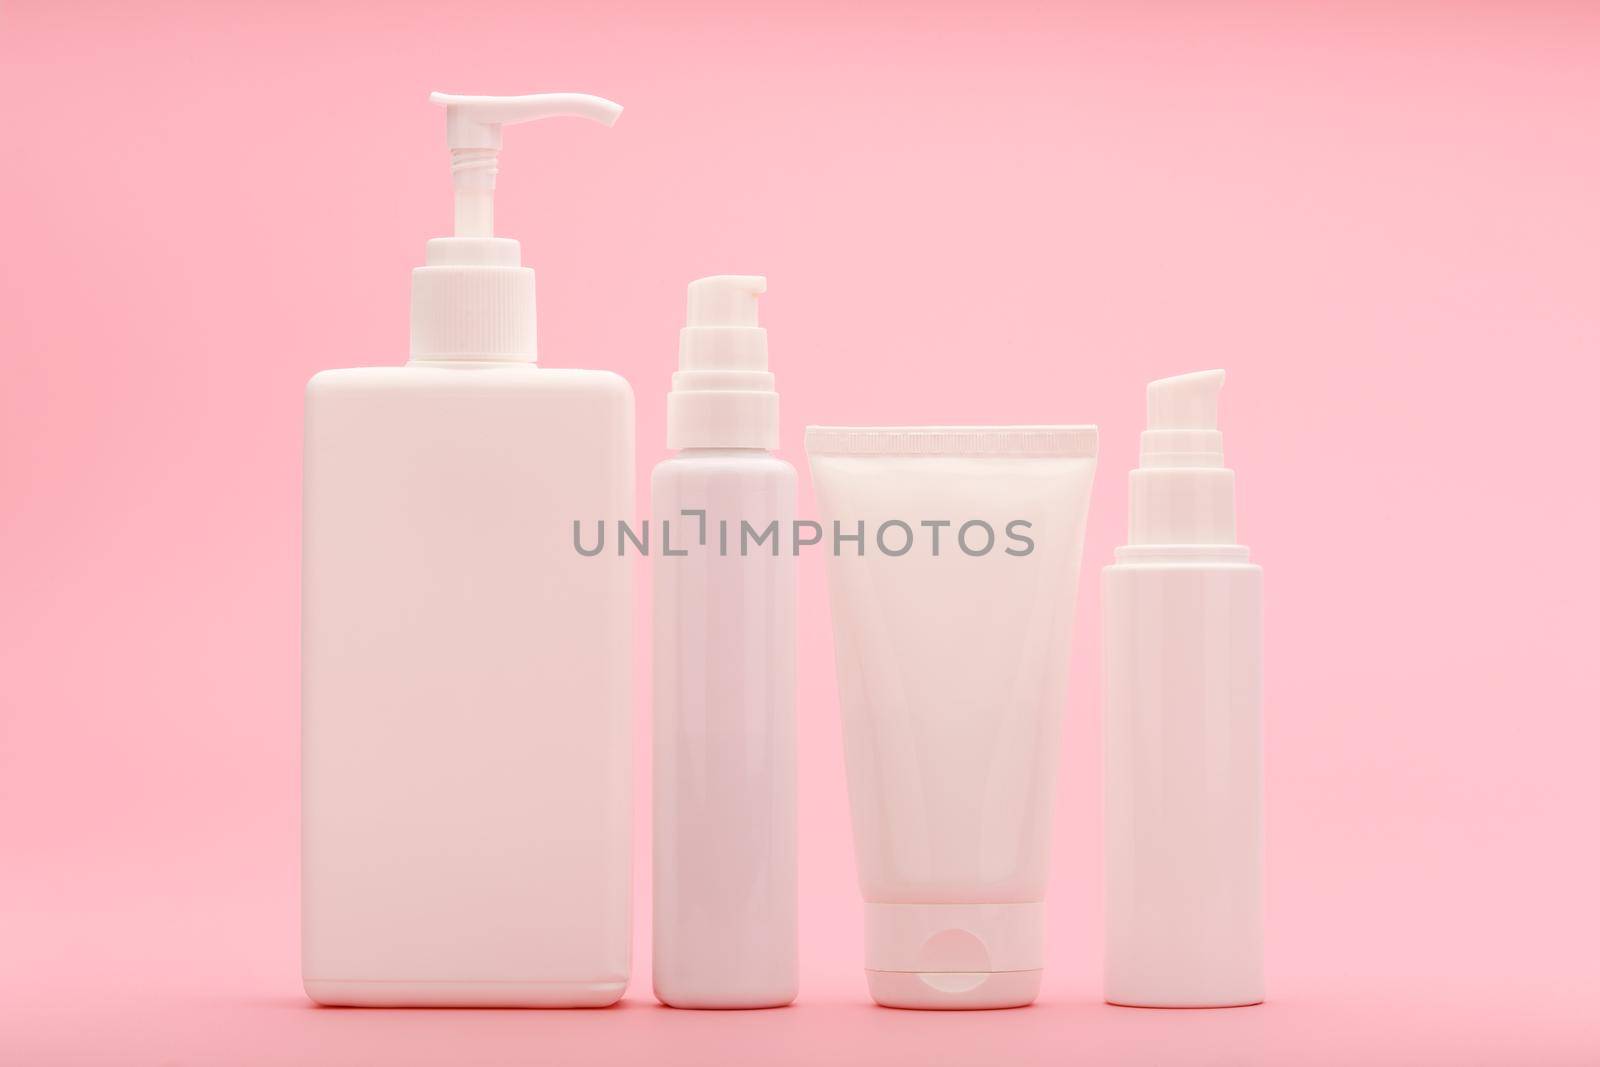 Set of beauty products for daily anti acne skin treatment against light pink background. Concept of beauty products for regular face and bode care